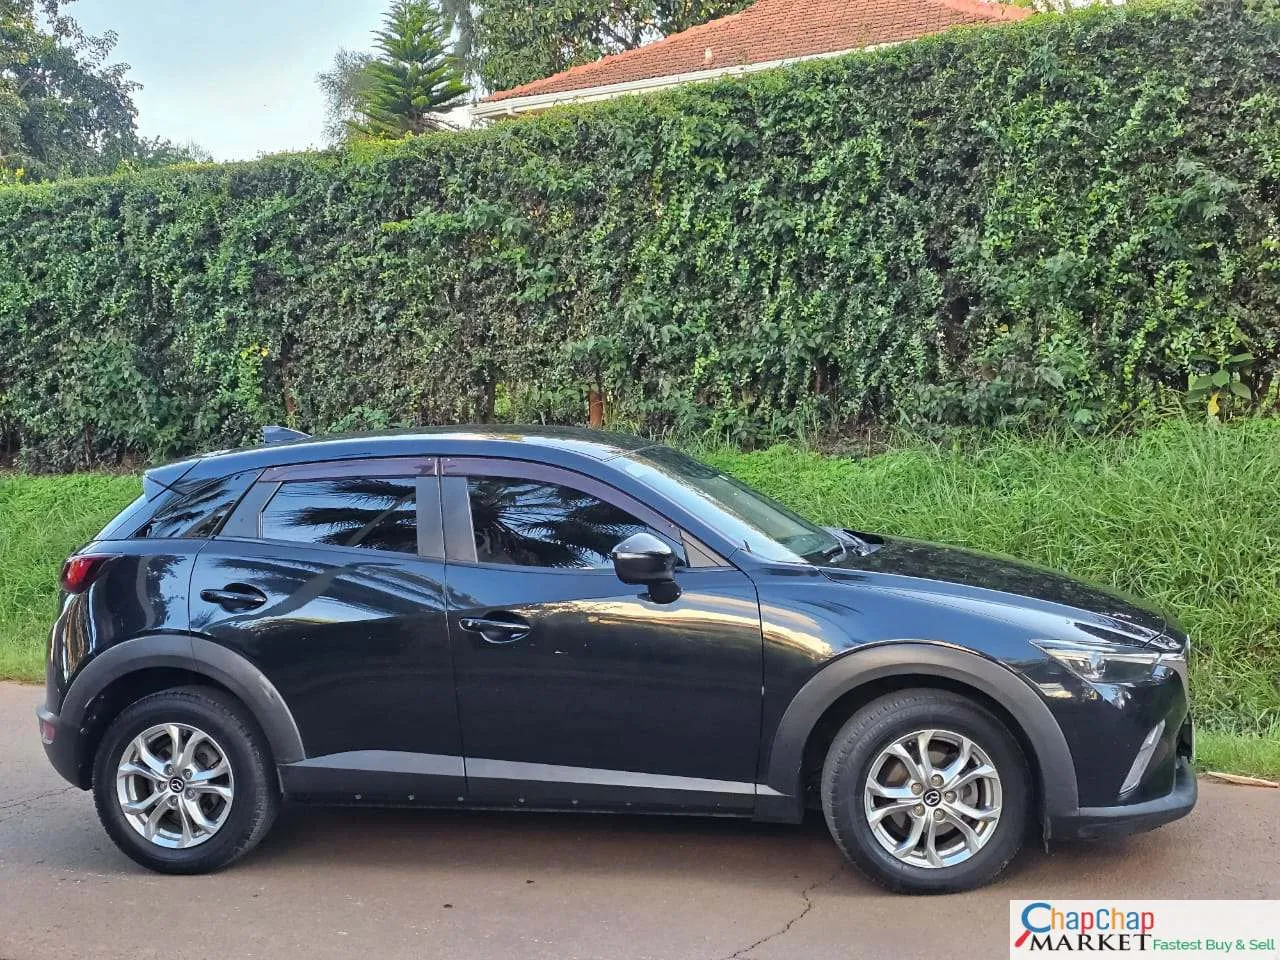 Mazda CX3 for sale in kenya QUICK SALE hire purchase installments You Pay 30% DEPOSIT TRADE IN OK EXCLUSIVE Mazda cx5 Kenya petrol